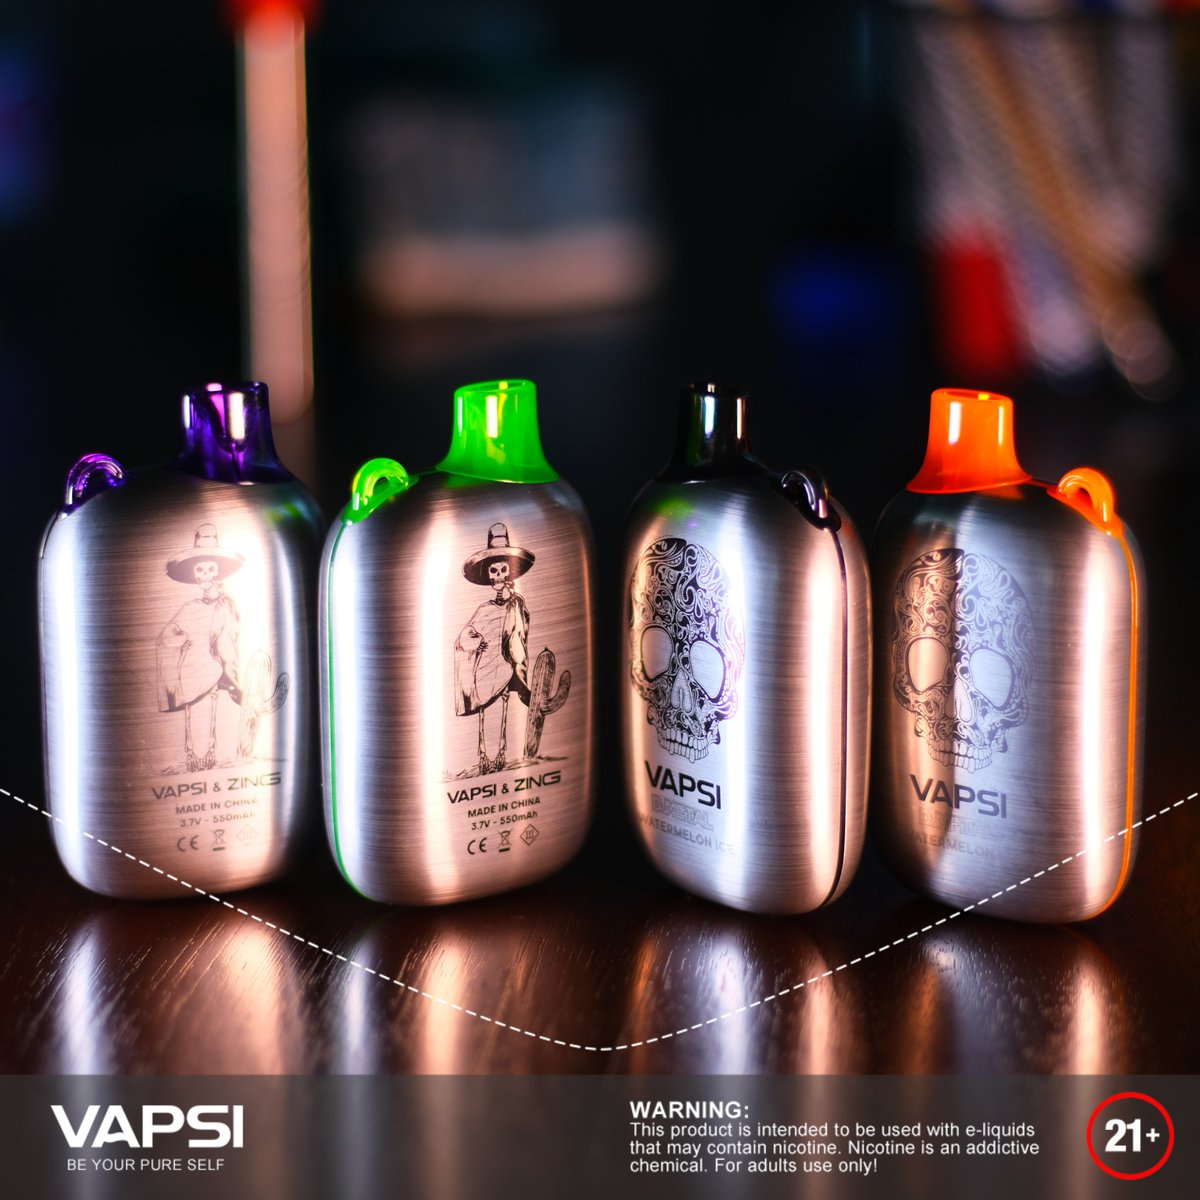 Do you want to take one？😊

Warnings: This product is only for adults.

#vapsi #disposable #vaping #vaperev #vaperevolution #vaperism #vapersofinstagram